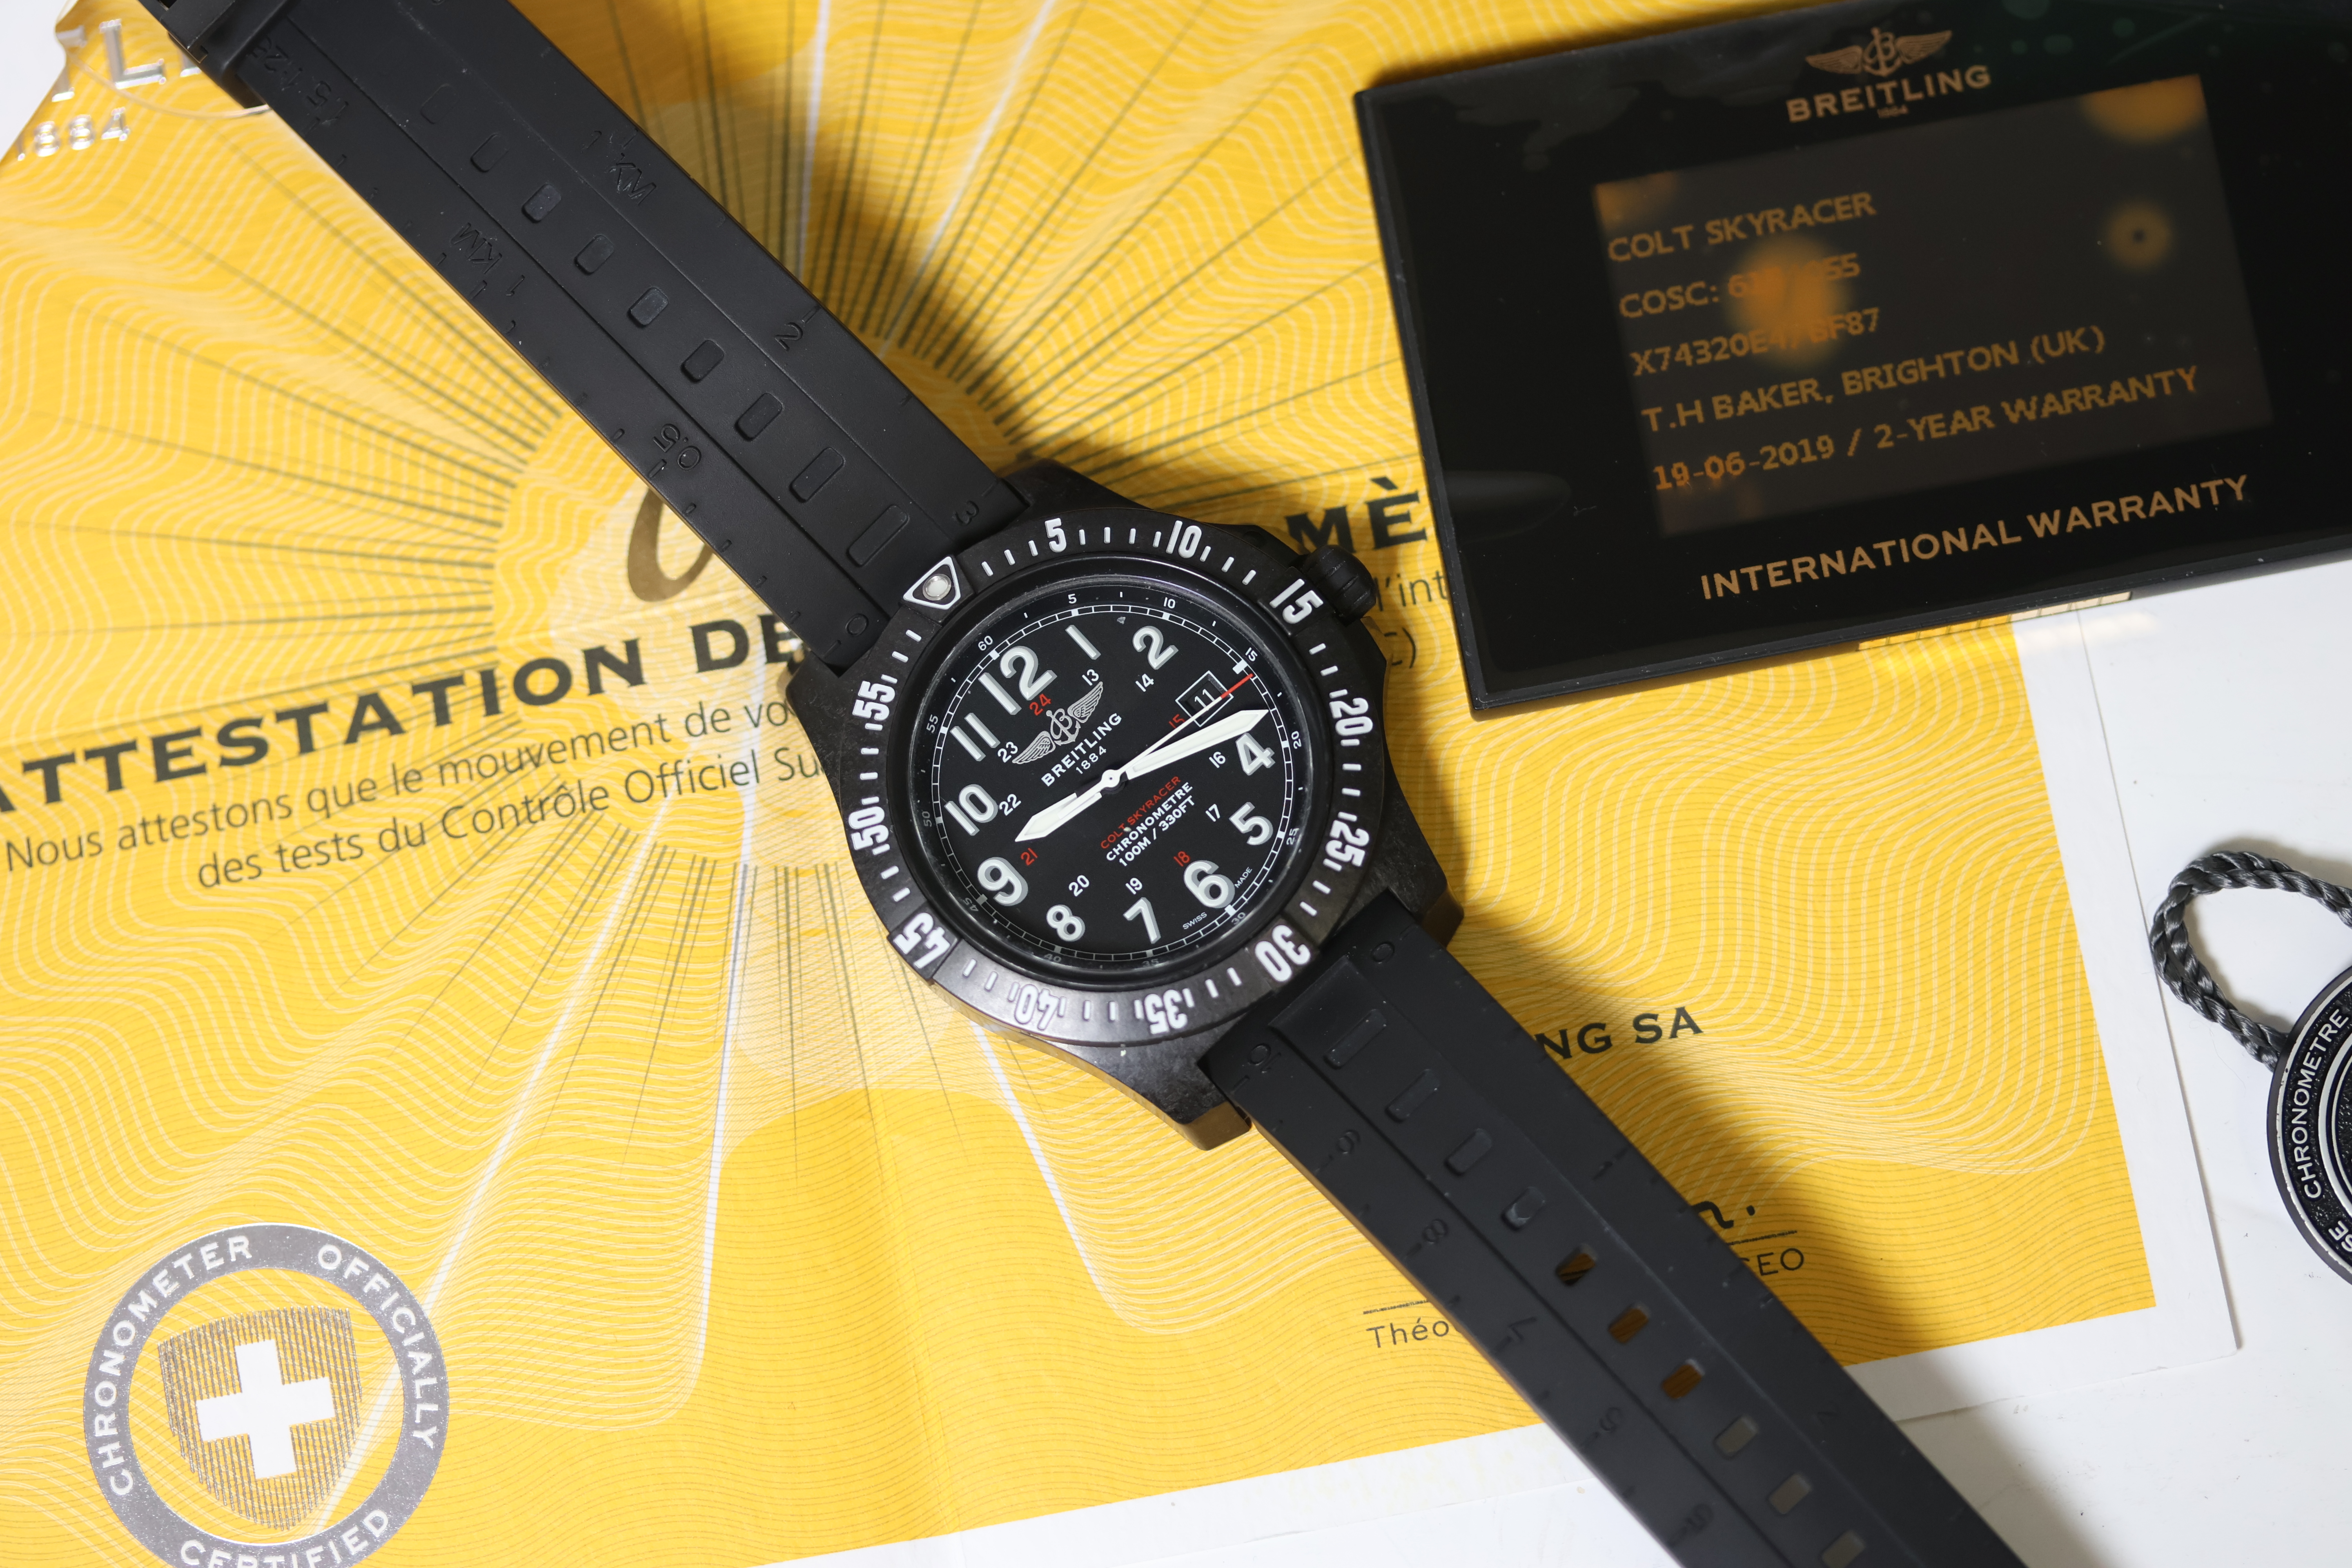 Breitling Colt Skyracer Quartz with Box and Papers 2019 - Image 4 of 4